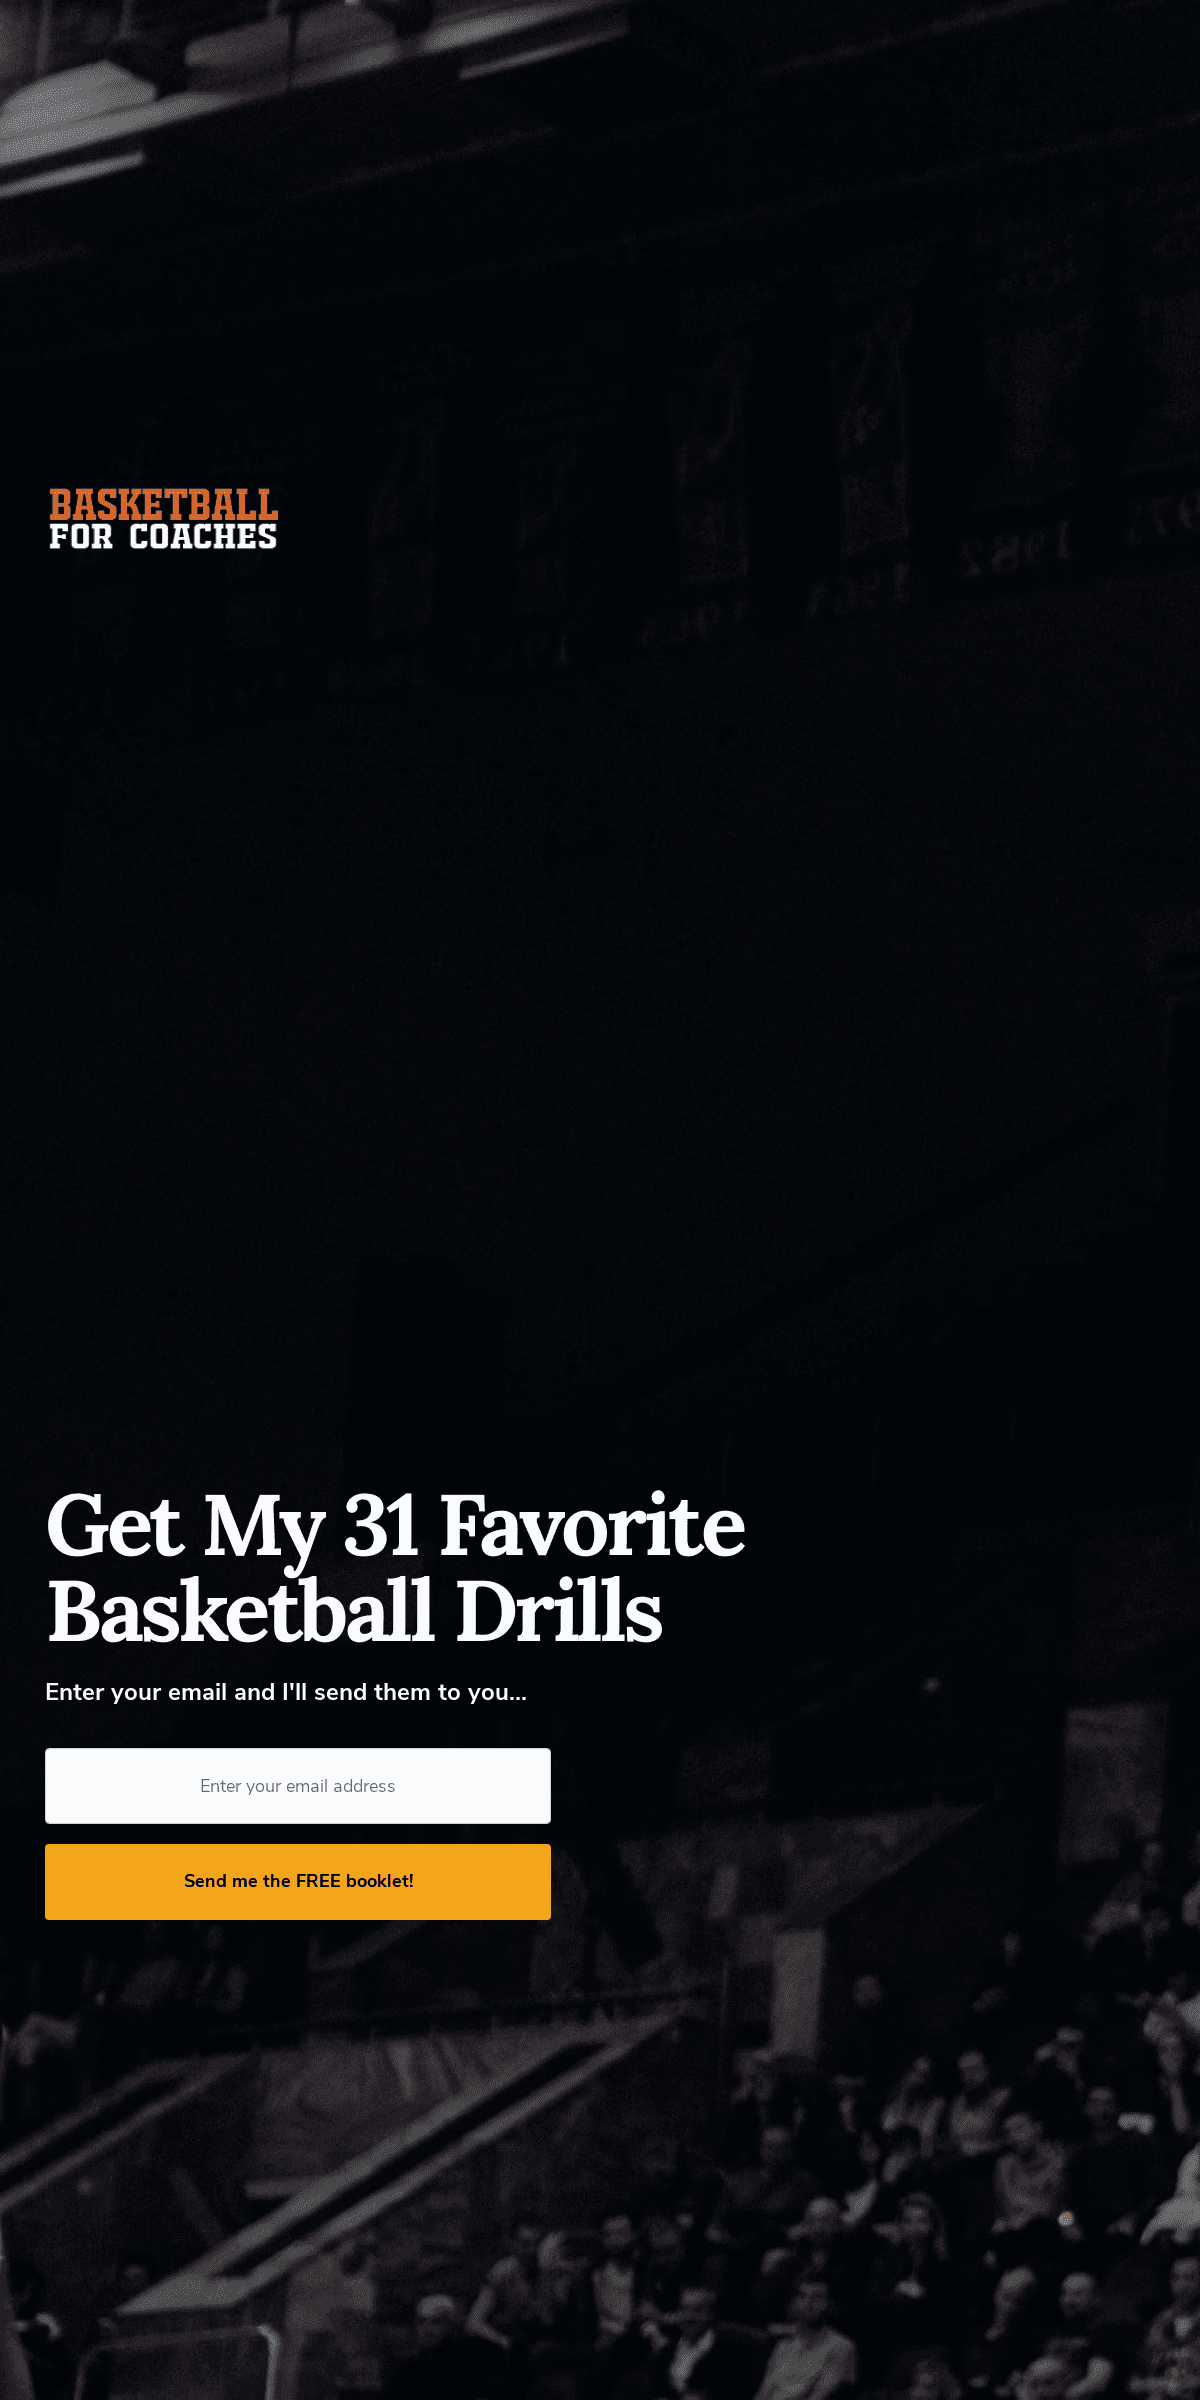 A complete backup of basketballforcoaches.com